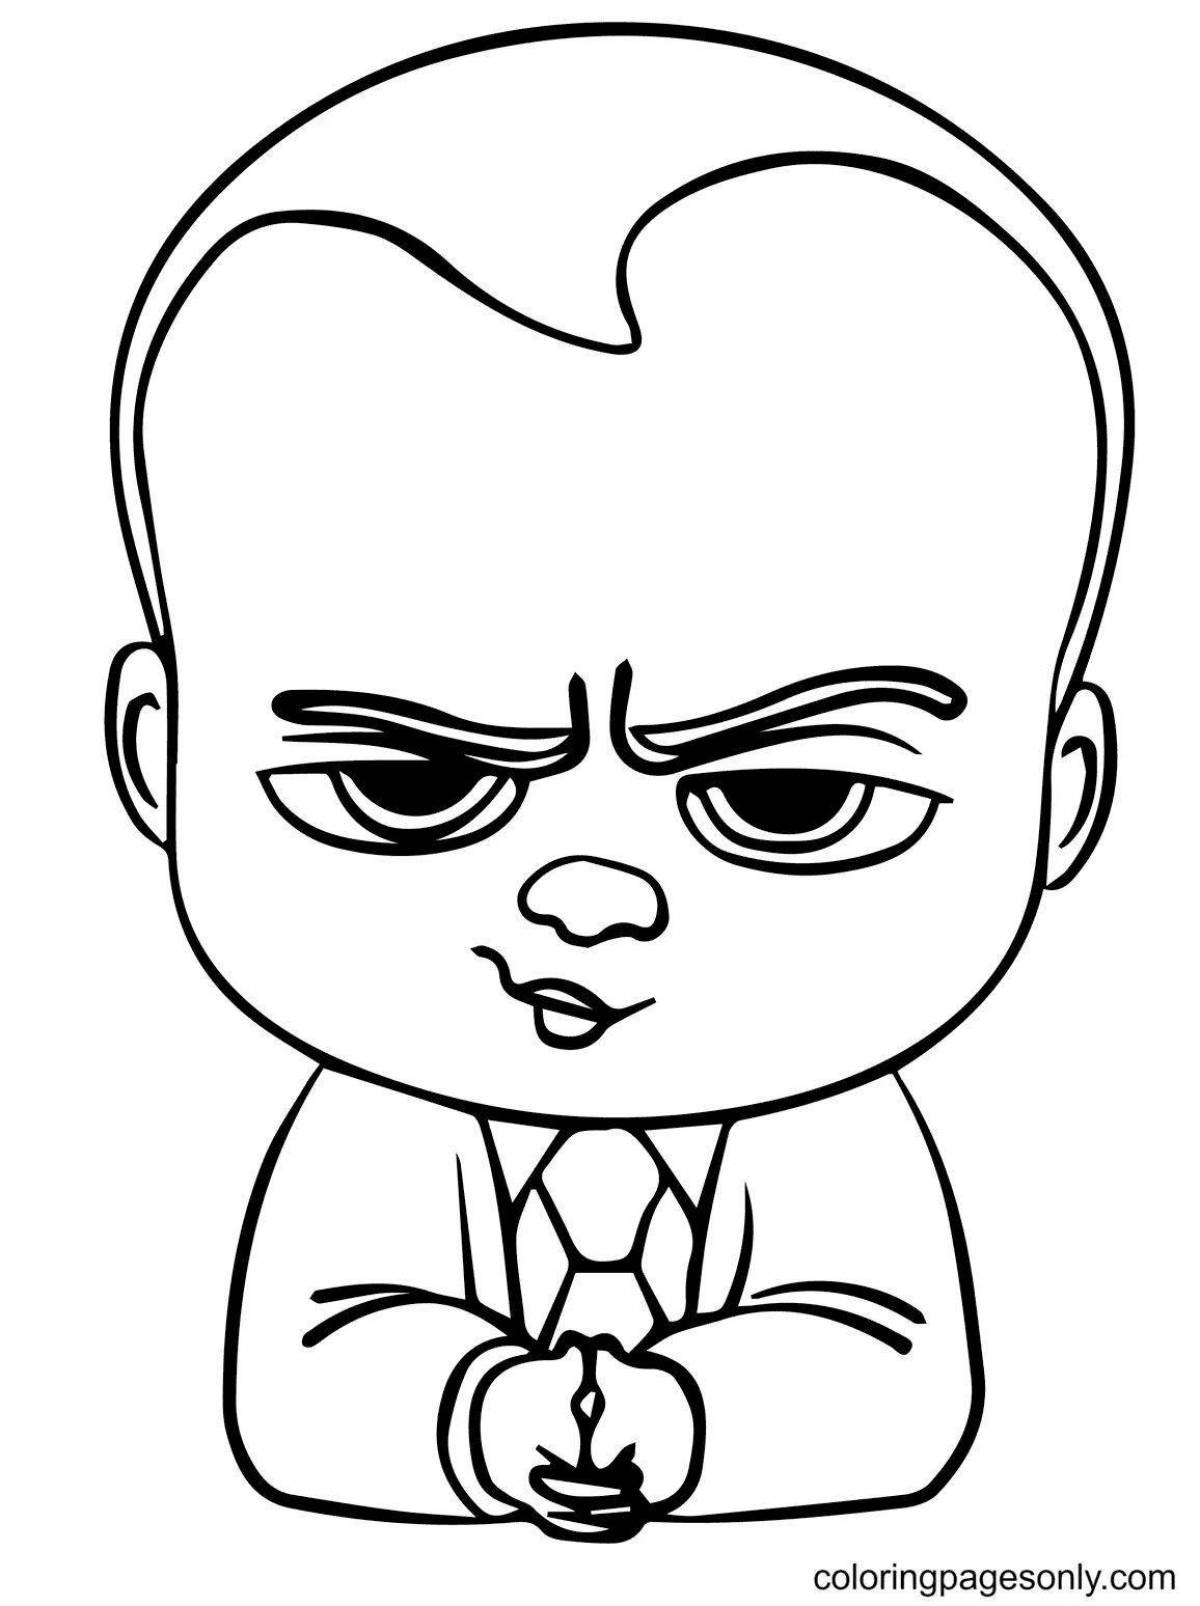 Charming baby boss coloring book